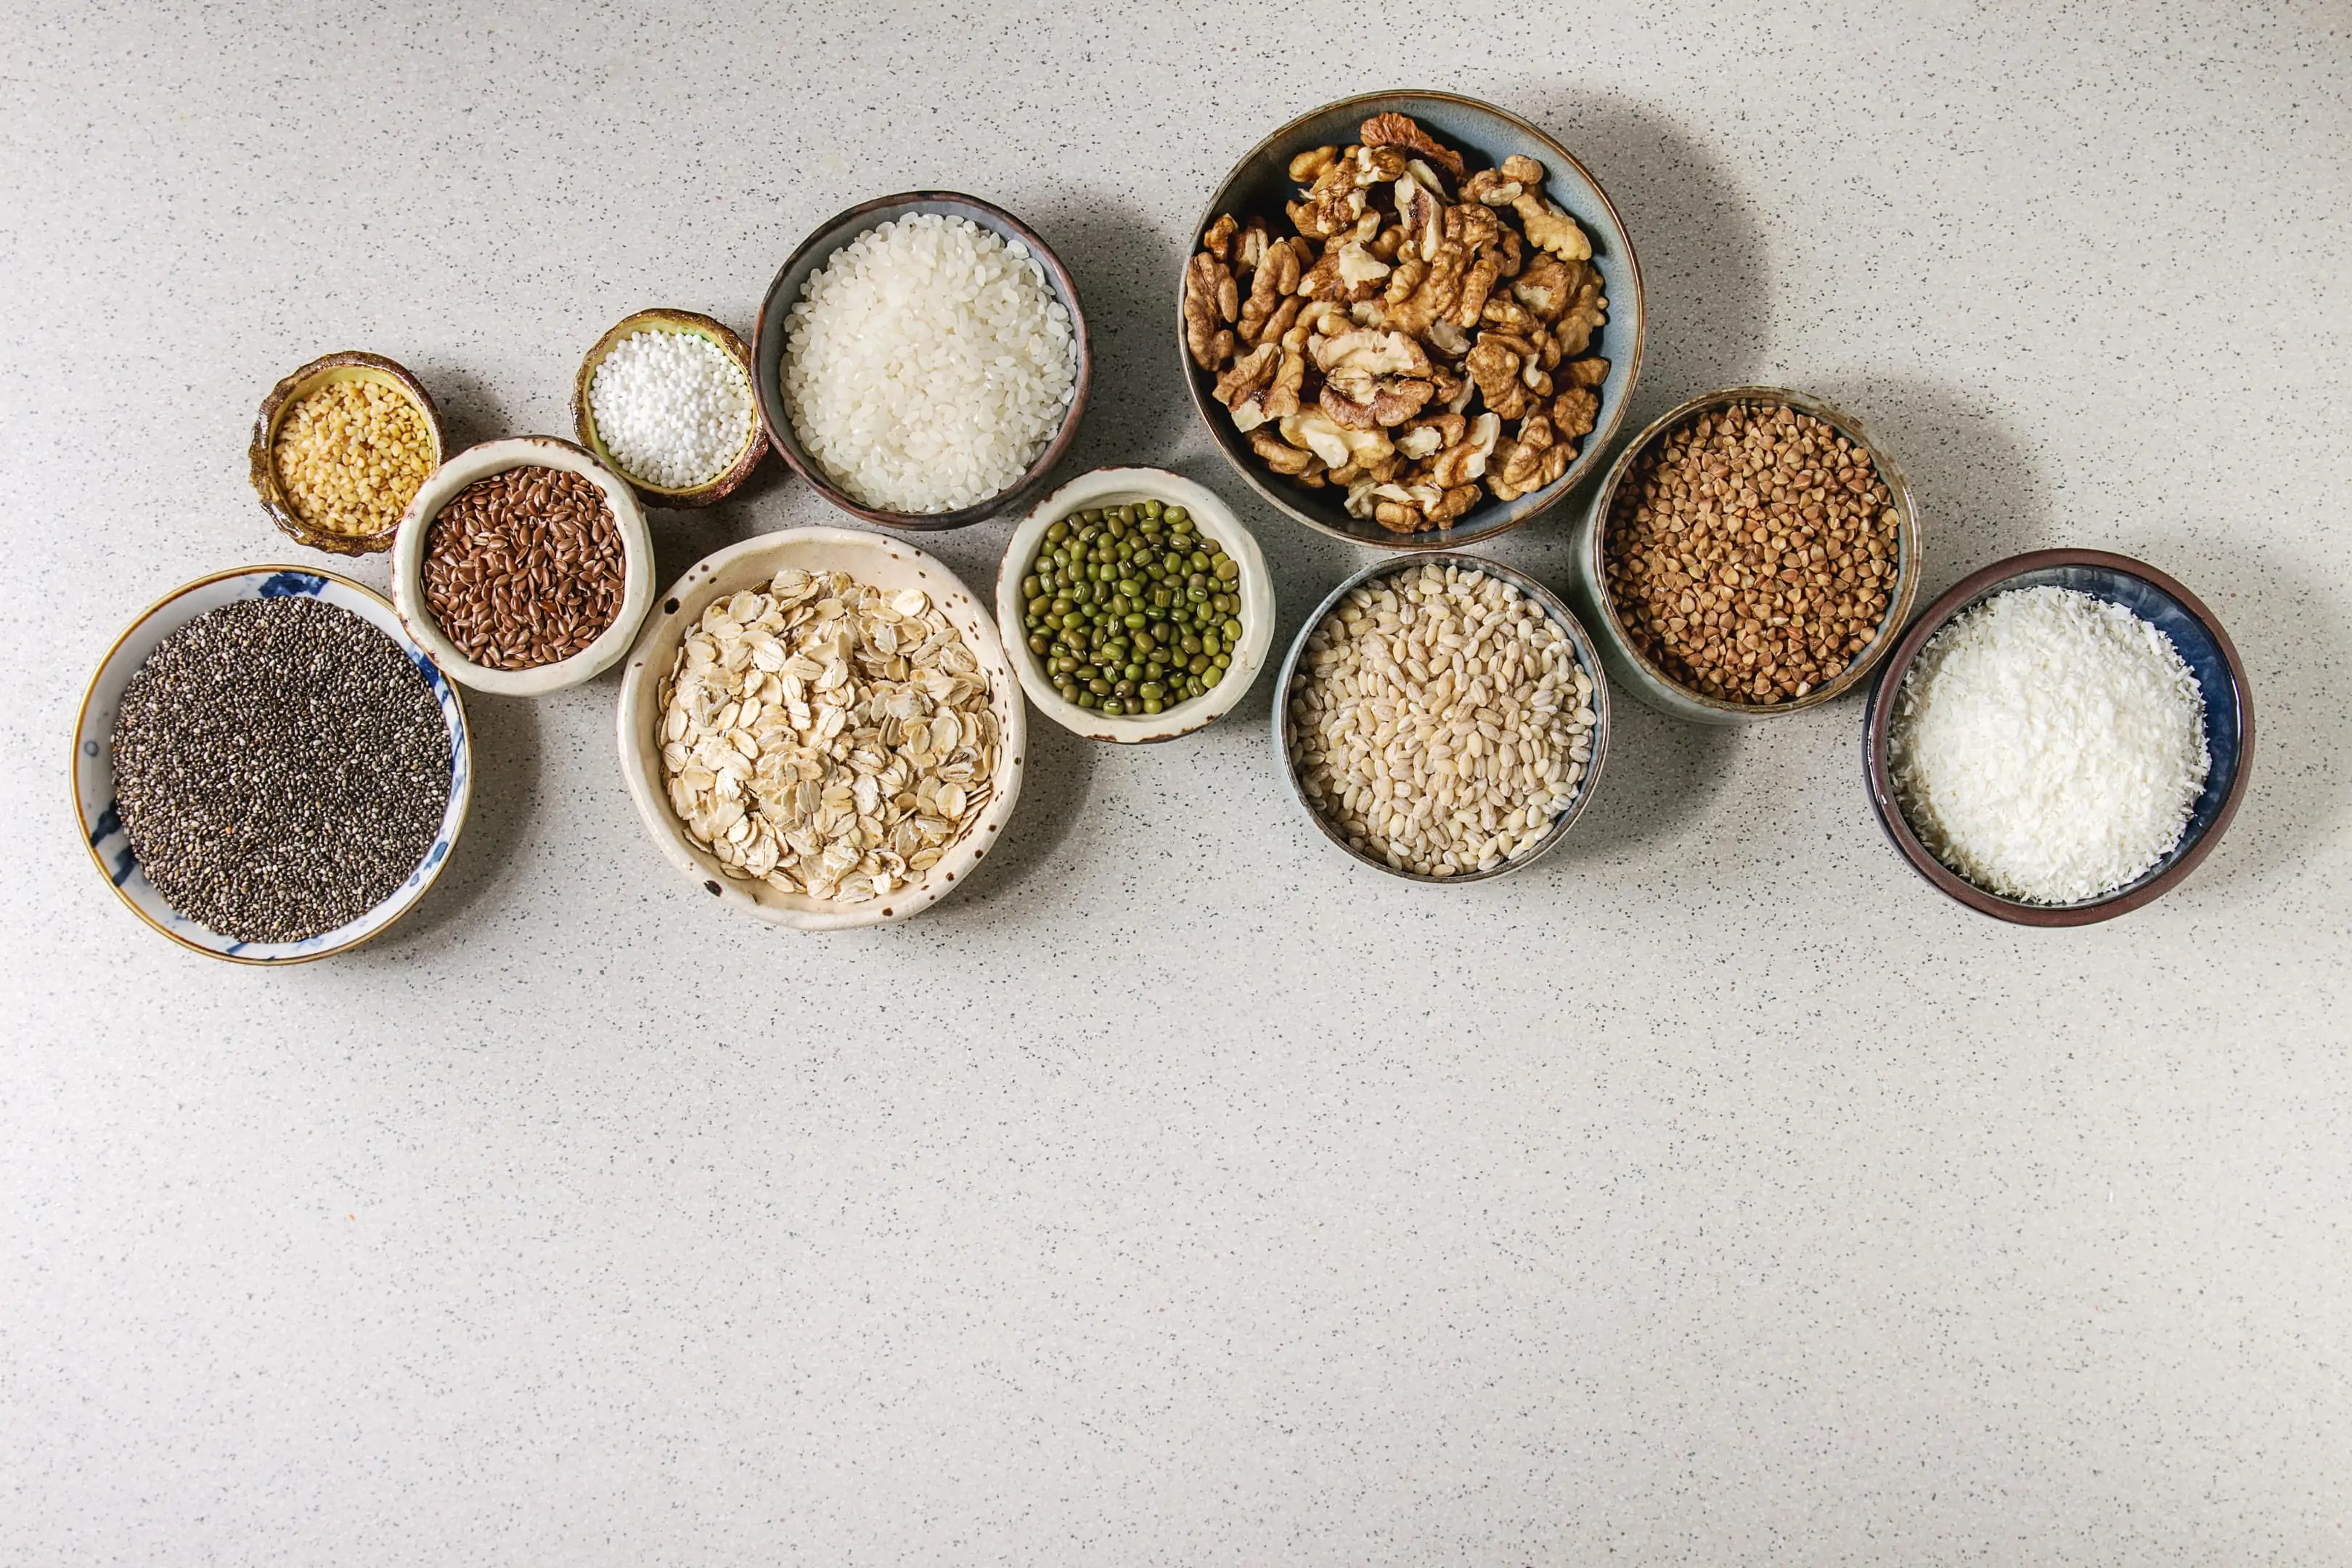 Variety of raw uncooked grains including wheat, buckwheat, oatmeal, and rice which are part of the oldest foods we still eat